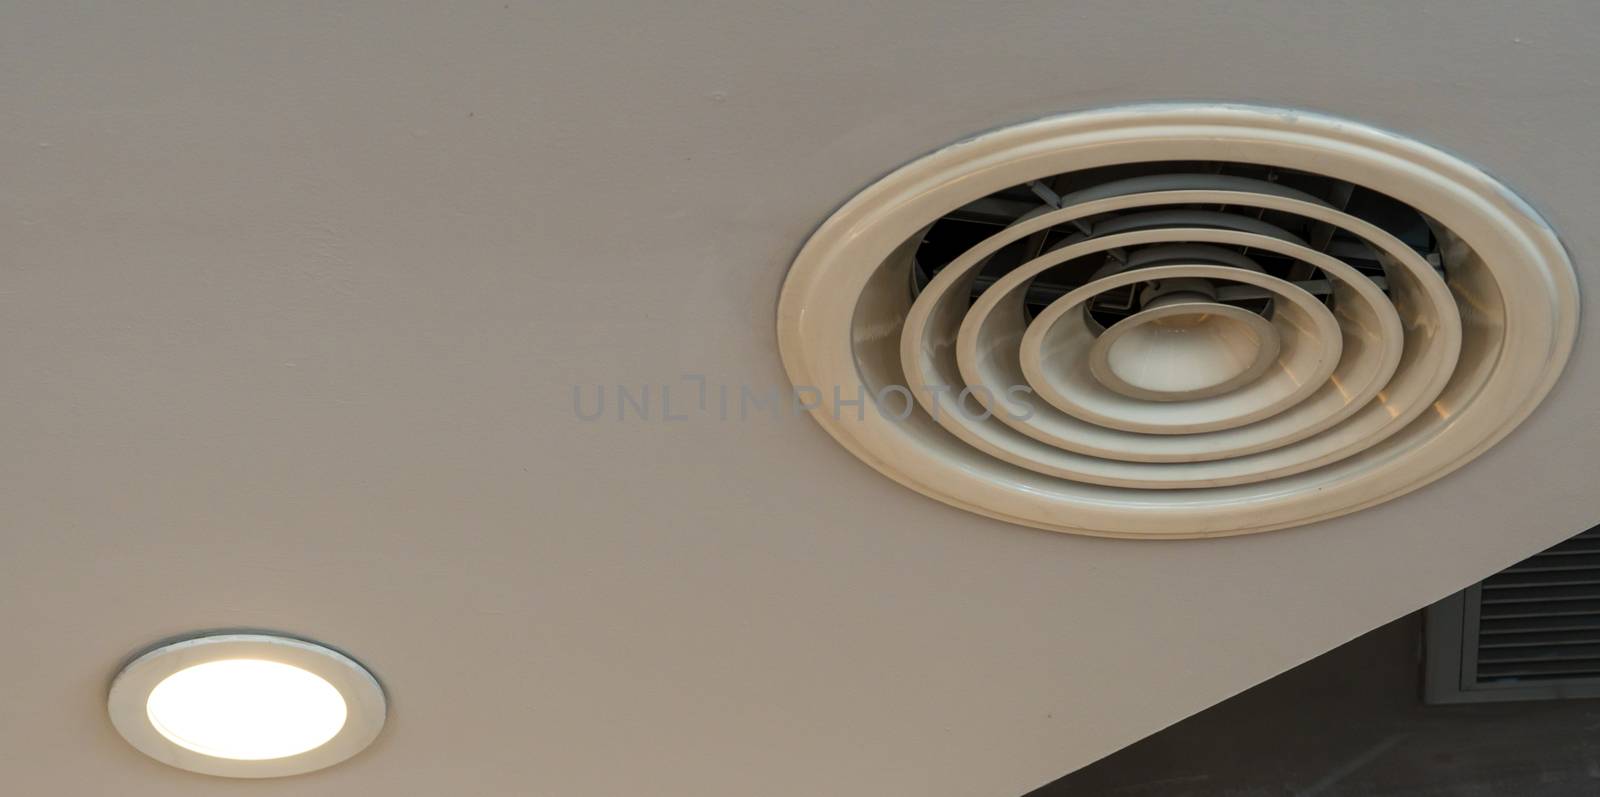 Air duct on ceiling in the mall or hospital. Air conditioner install on gypsum ceiling near ceiling lamp. Building interior concept. Air heading unit on gypsum wall. Cool system in the building. 